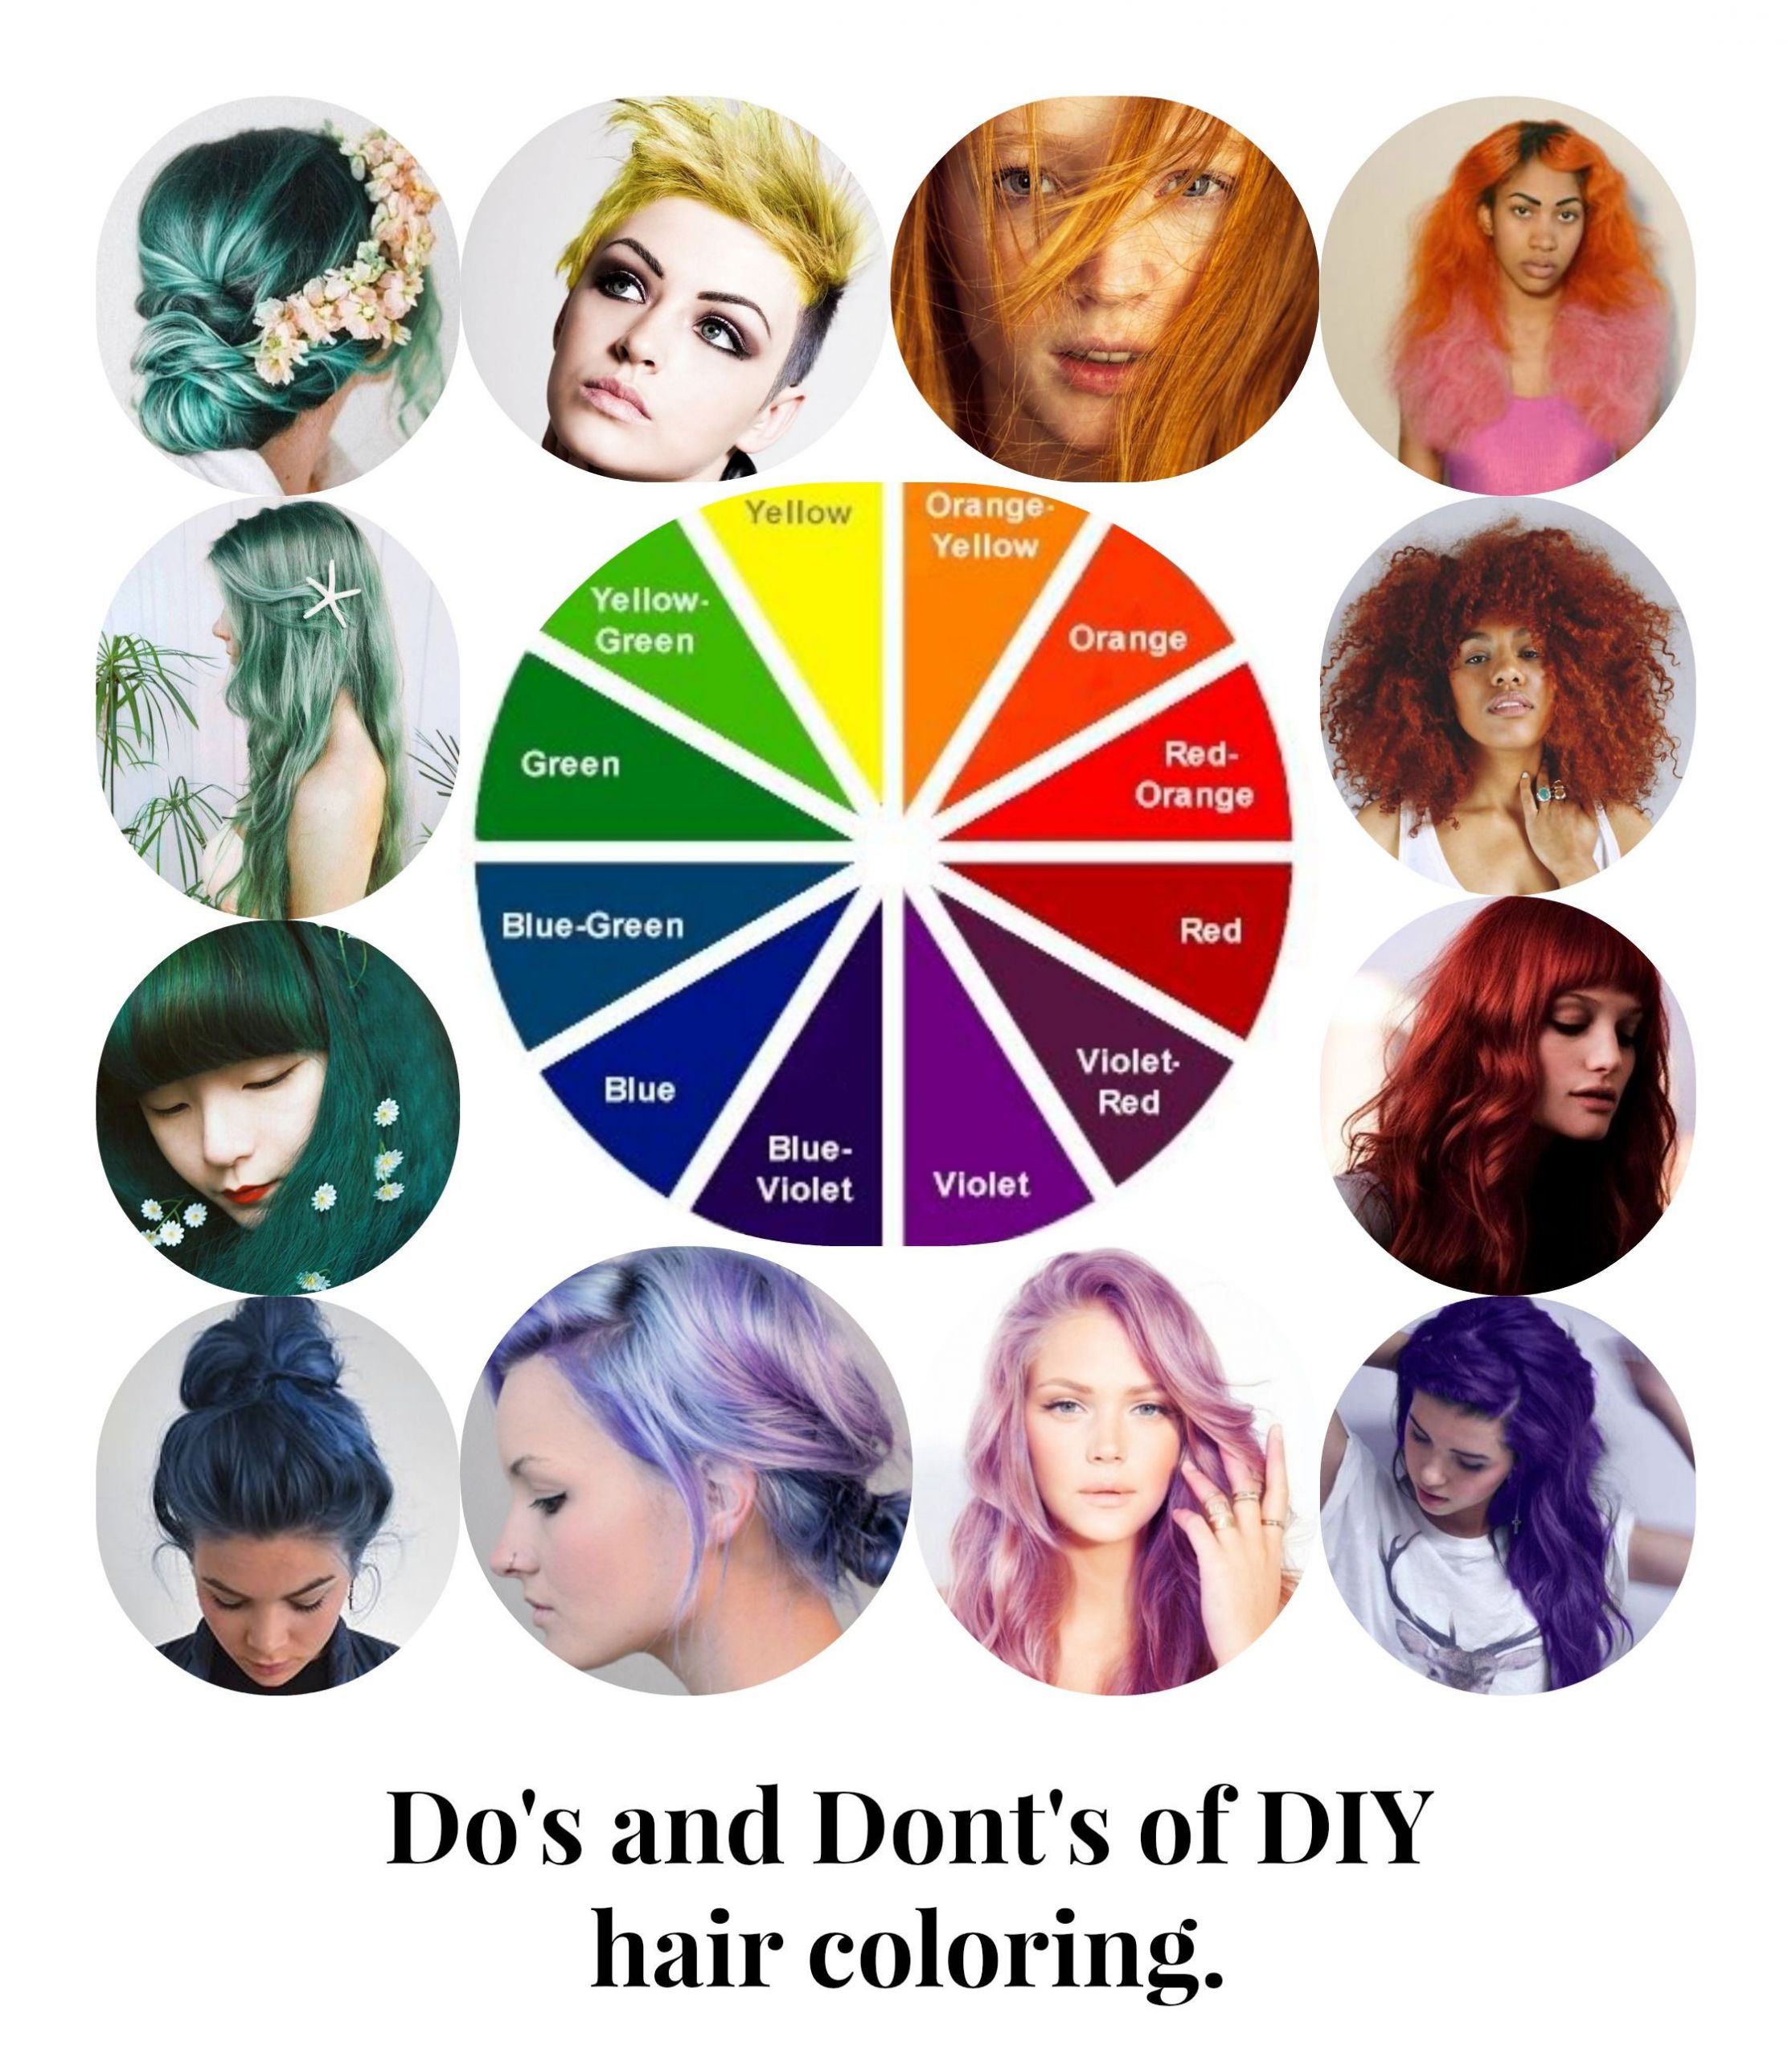 DIY Green Hair Dye
 The color wheel applied to hair dye and toner selection